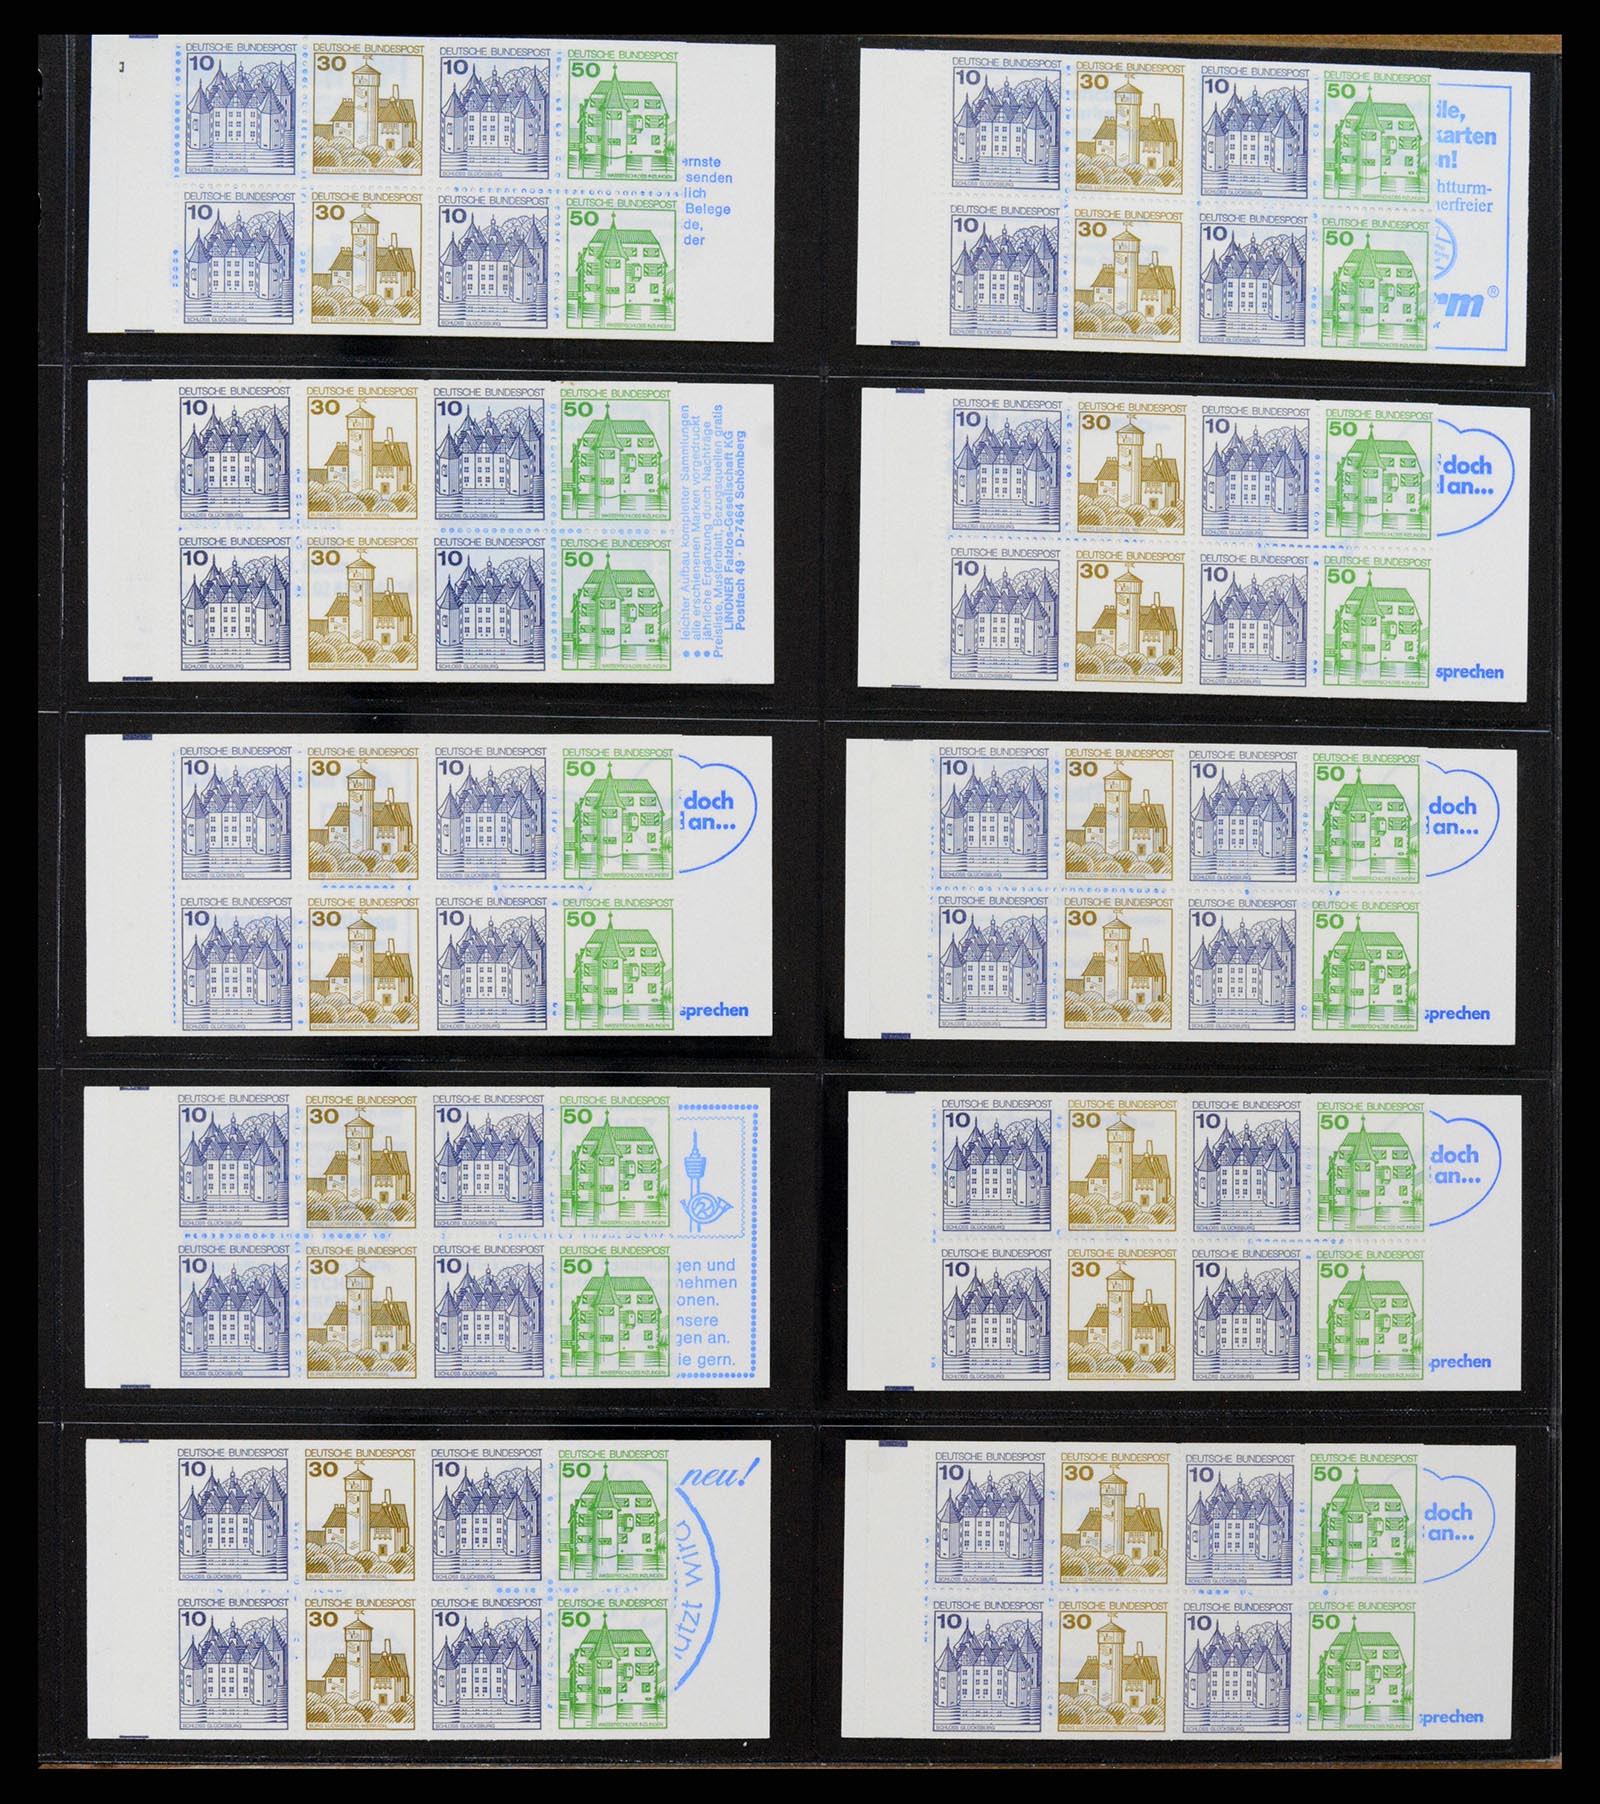 37365 032 - Stamp collection 37365 Bundespost stamp booklets 1951-2001.